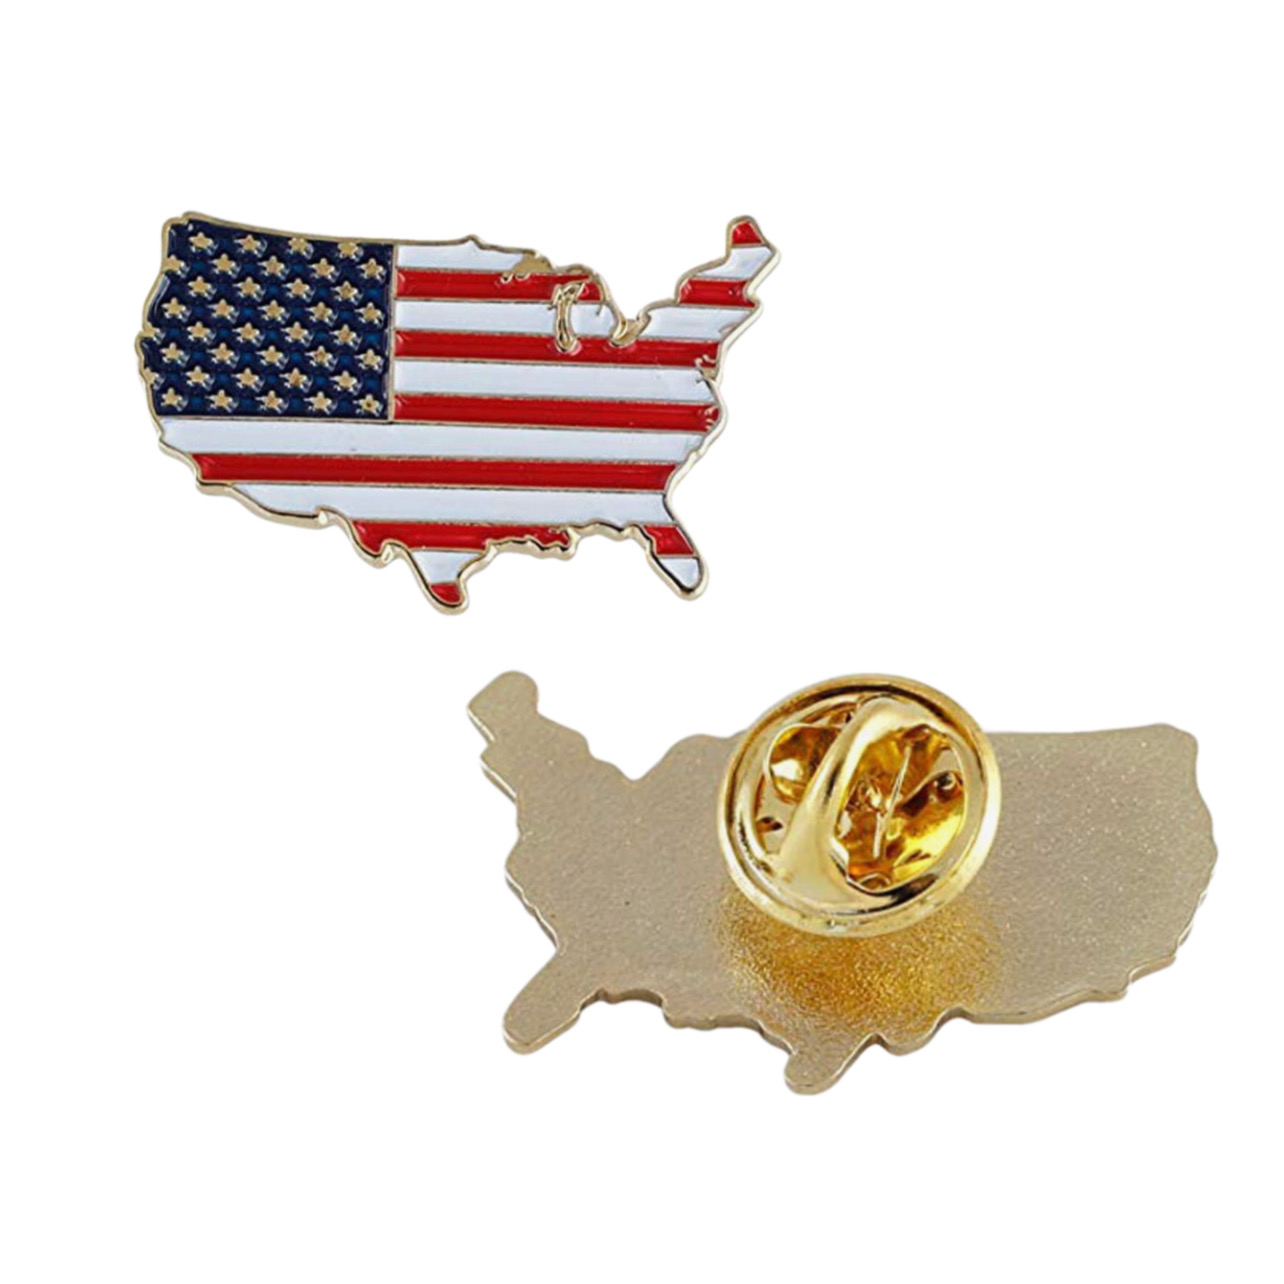 Unlit United States of America Outline Patriotic Pin 4th of July 5